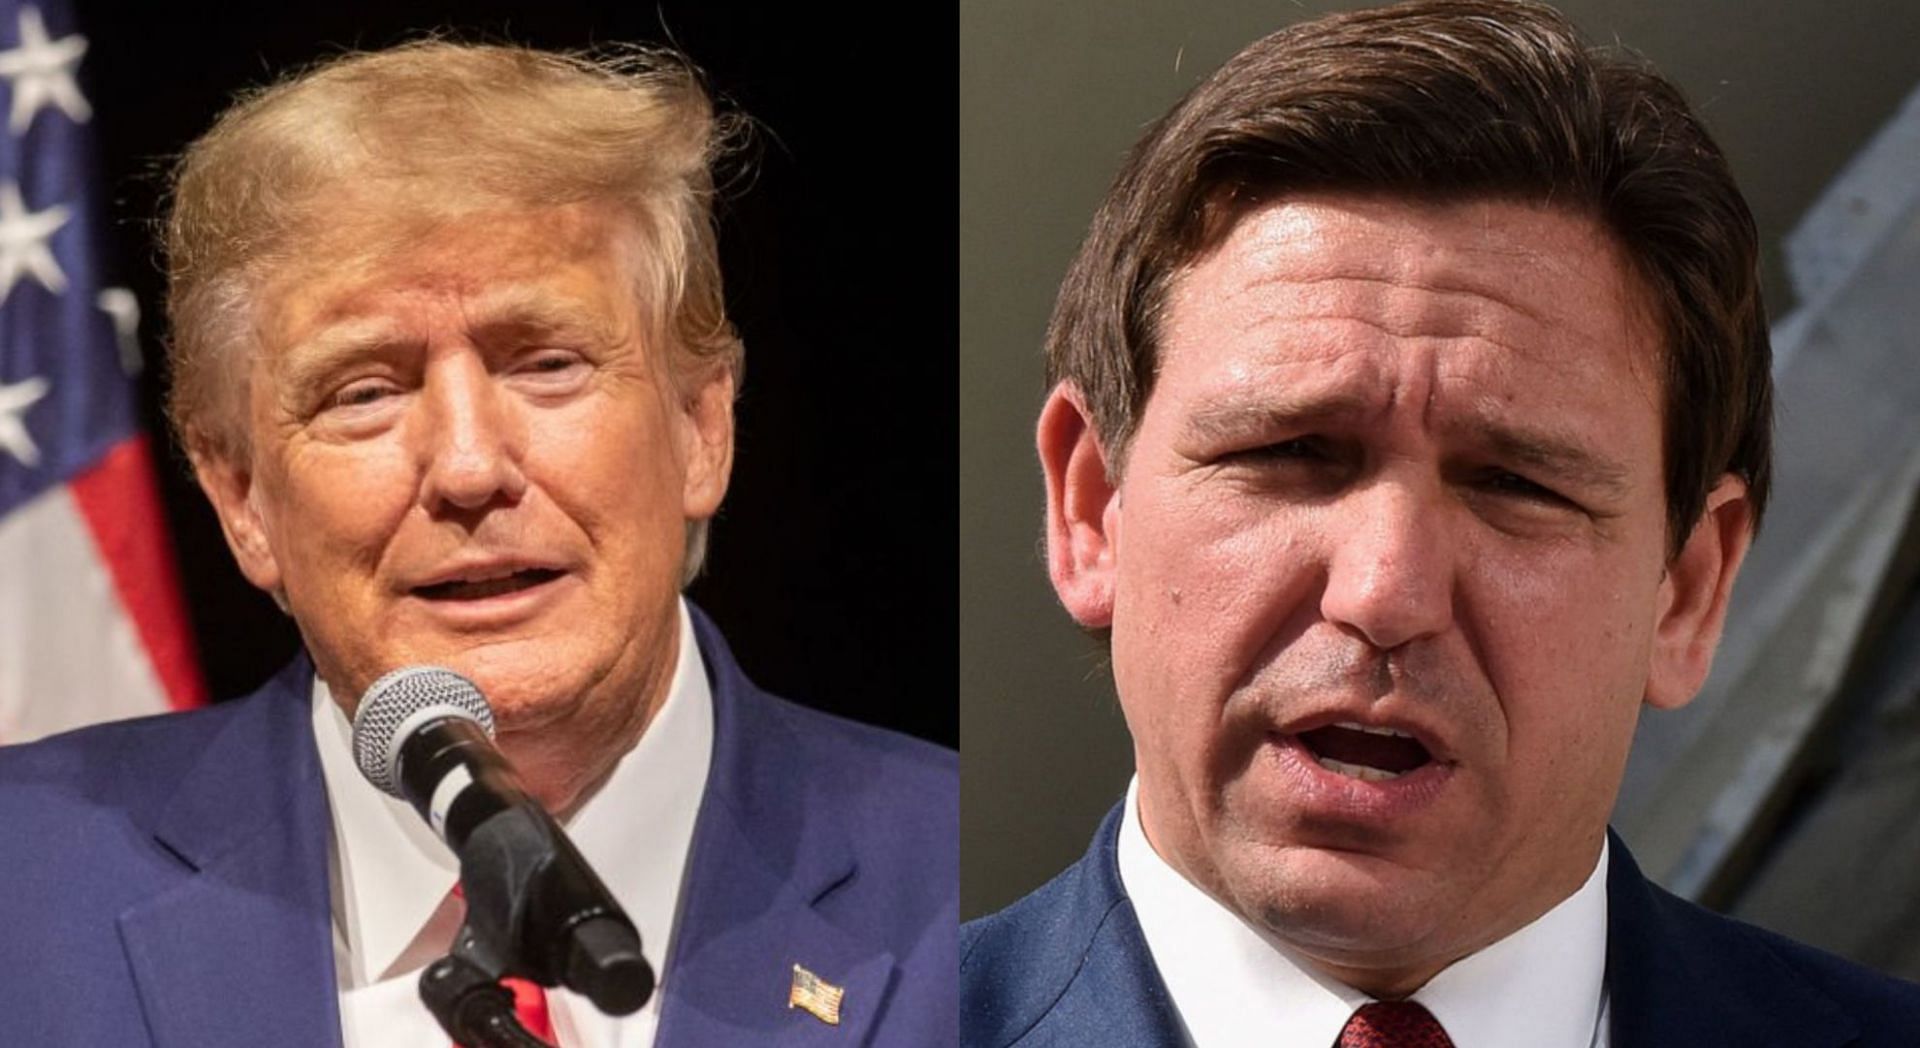 Donald Trump shared a social media post accusing Ron DeSantis of drinking with high school girls as a teacher (Image via Getty Images)